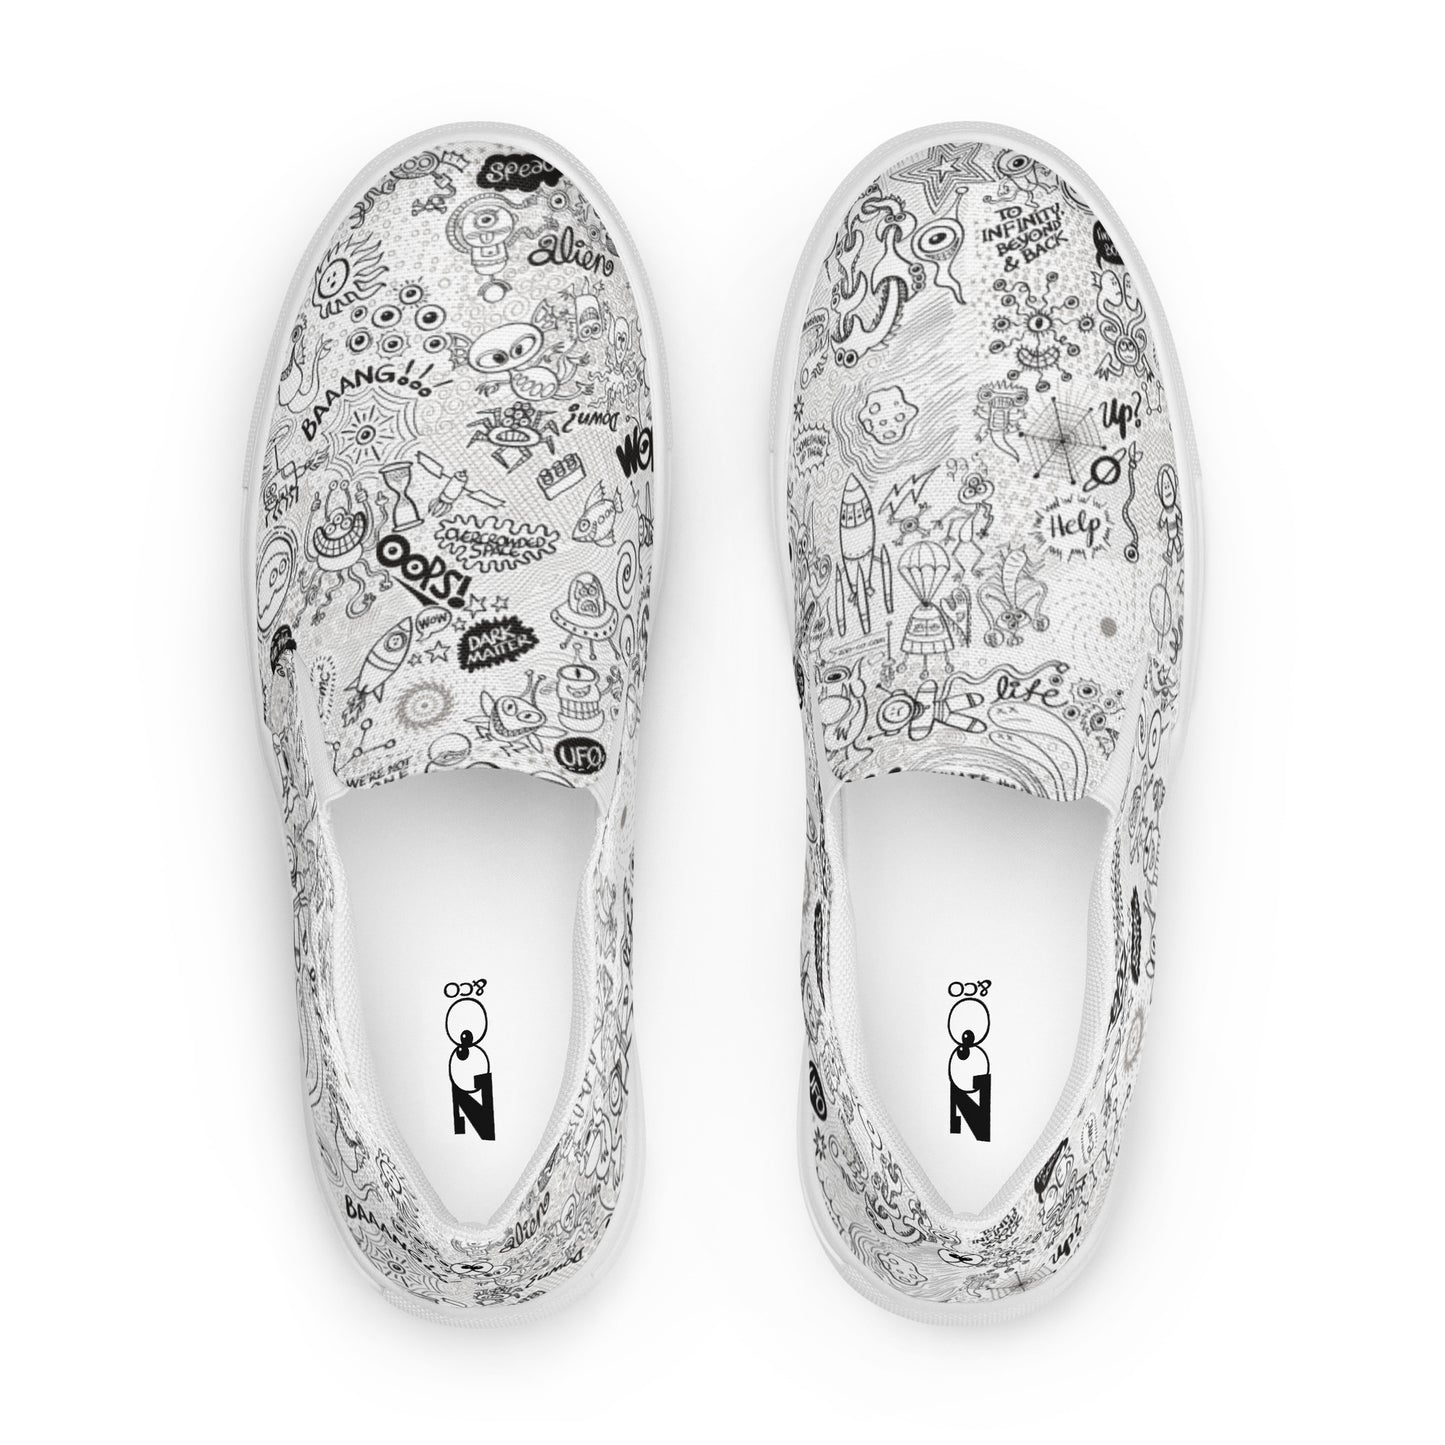 Celebrating the most comprehensive Doodle art of the universe Men’s slip-on canvas shoes. Top view